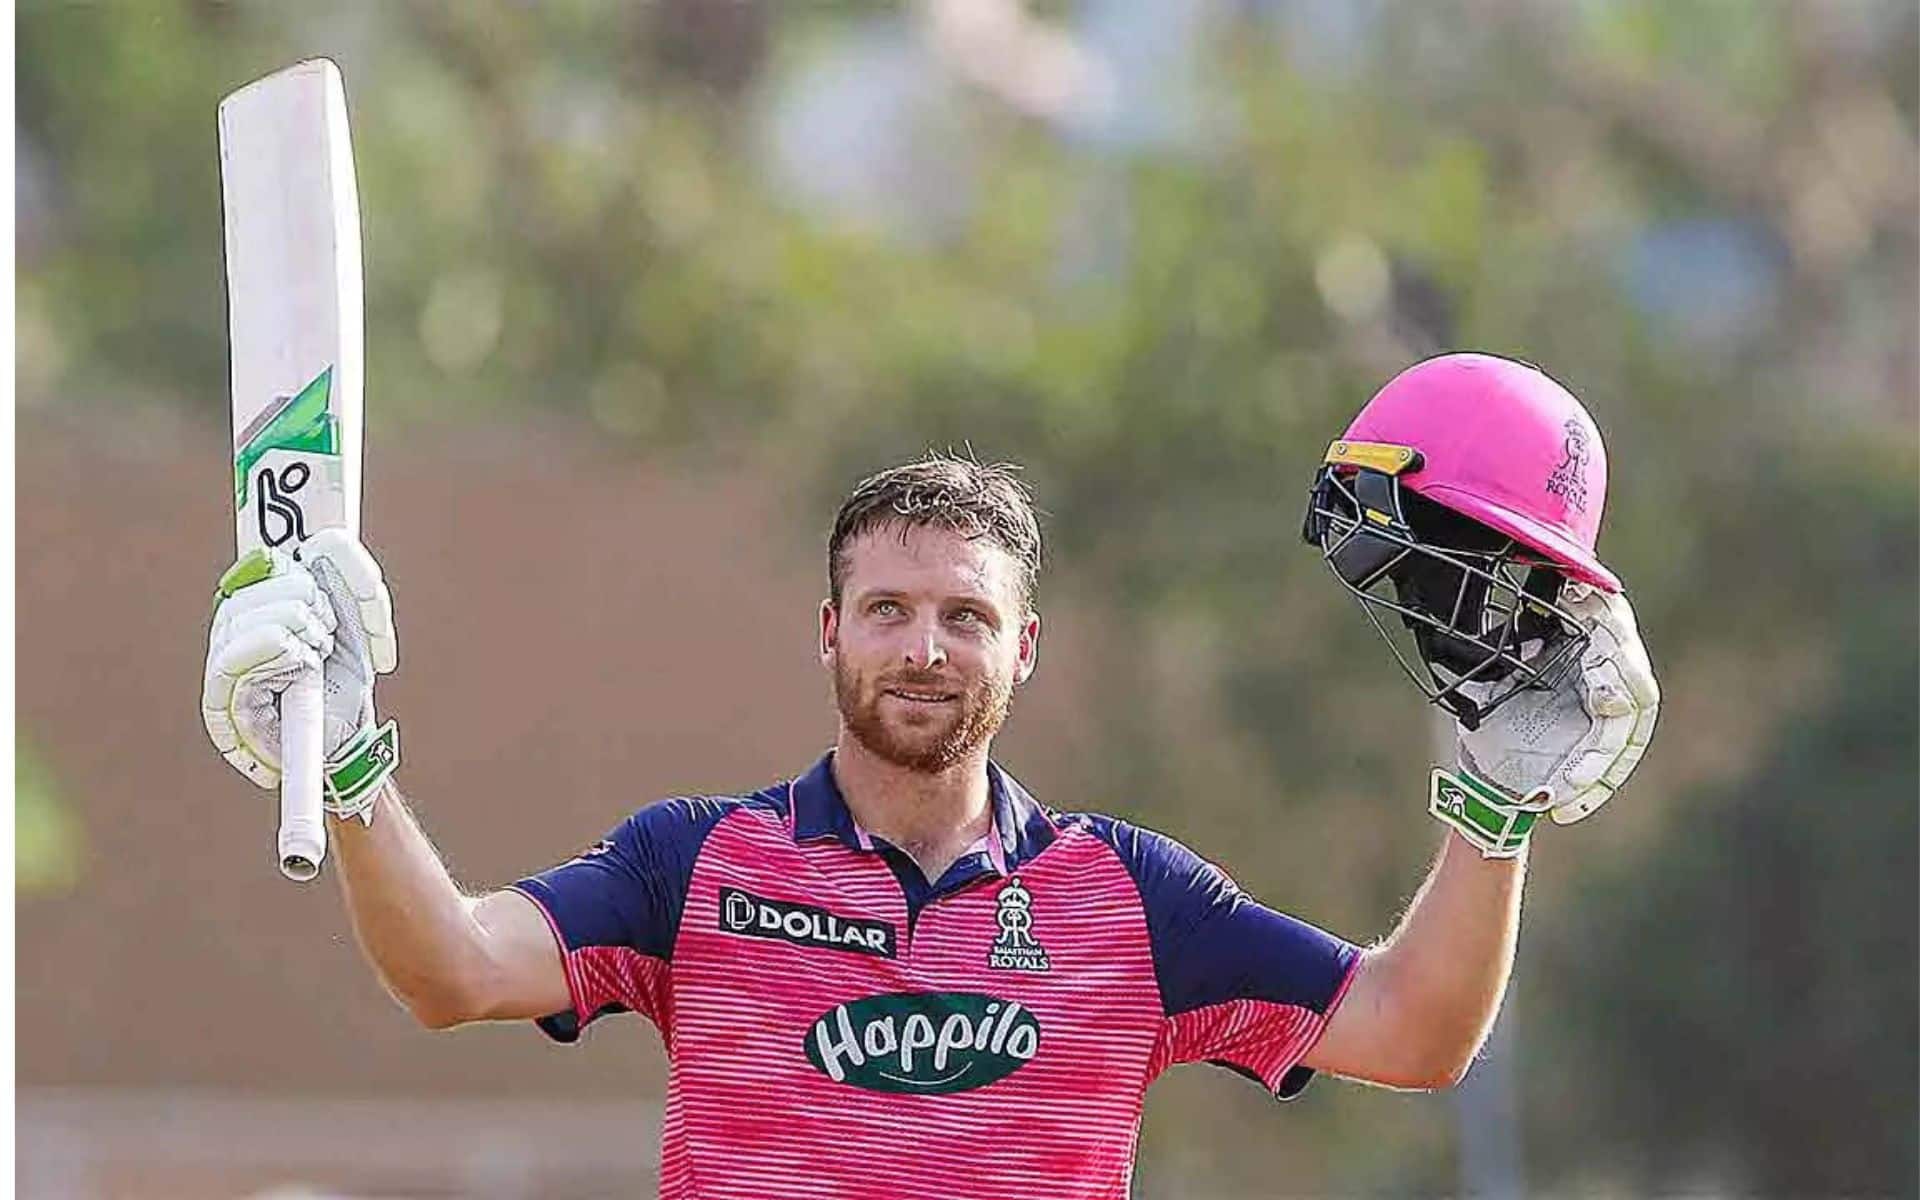 'I Am Officially Josh Buttler': Has Buttler Changed His Name In The Middle Of IPL? Video Goes Viral